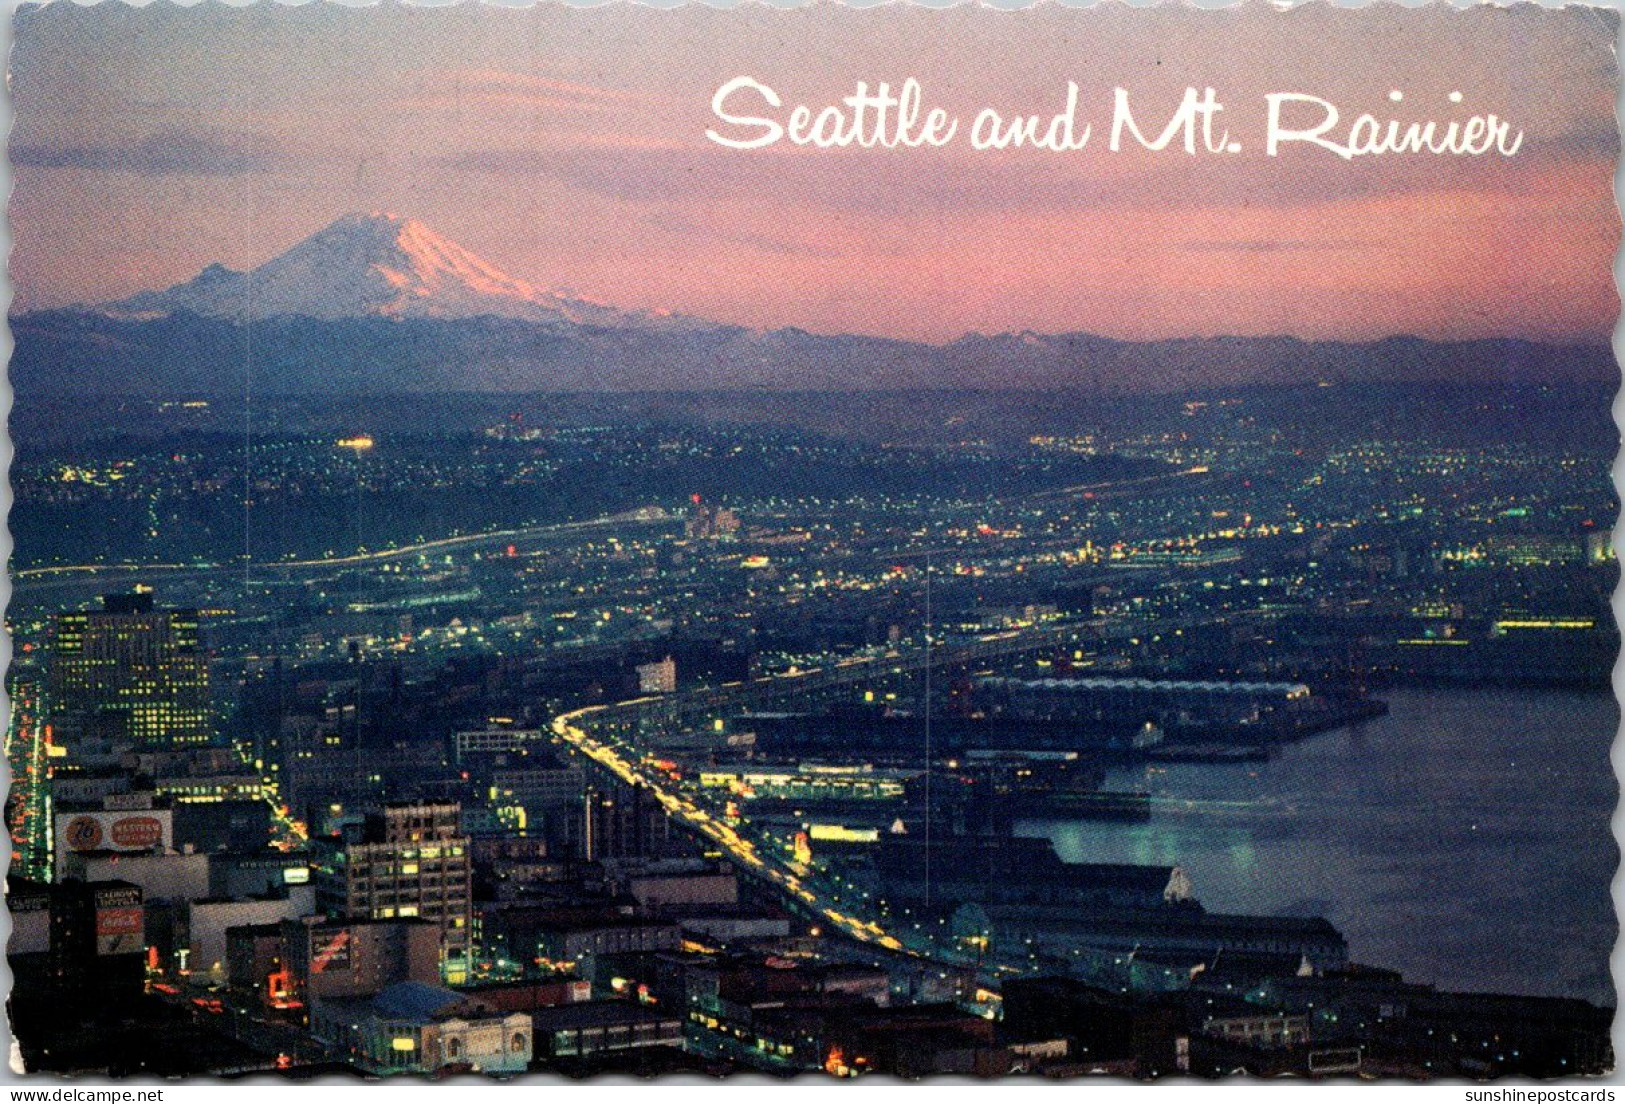 Washington Seattle And Mount Rainier Looking South From The Top Of The S[pace Needle - Seattle